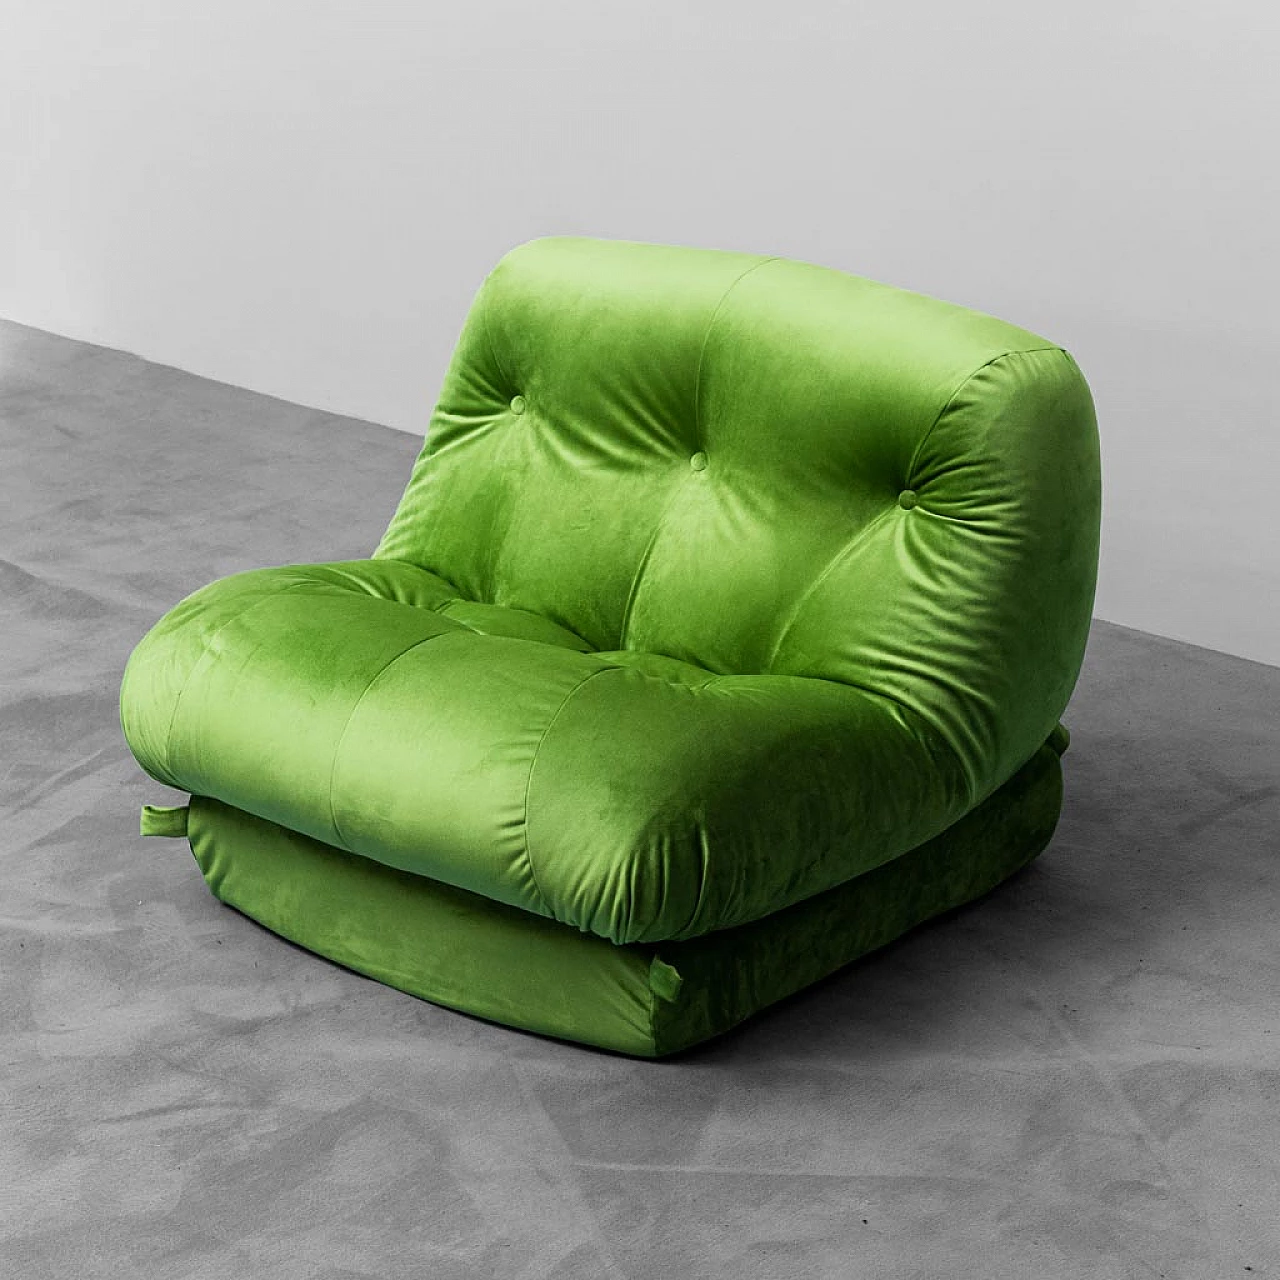 Green Nuvolone armchair by Rino Maturi for Mimo, 1970s 1